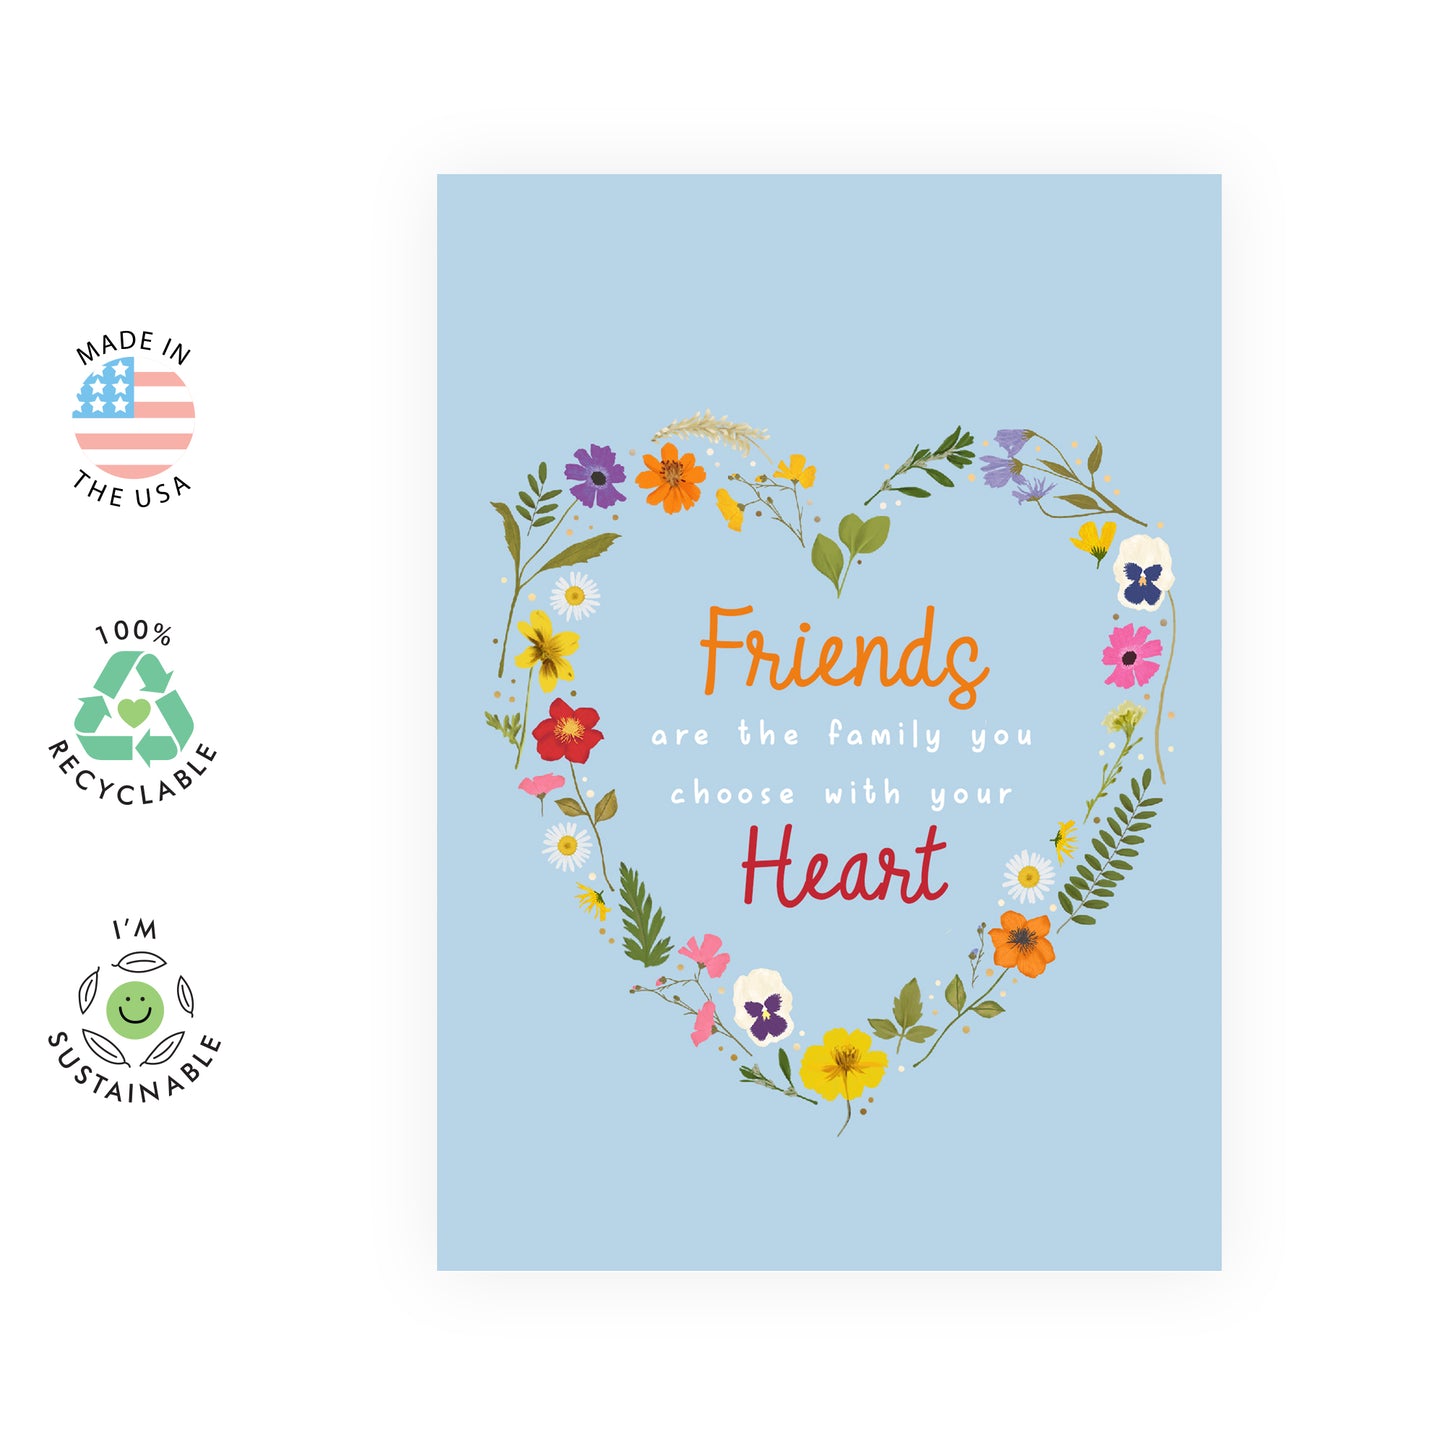 Sweet Birthday Card - Family You Choose With Your Heart - For Women Friends Her